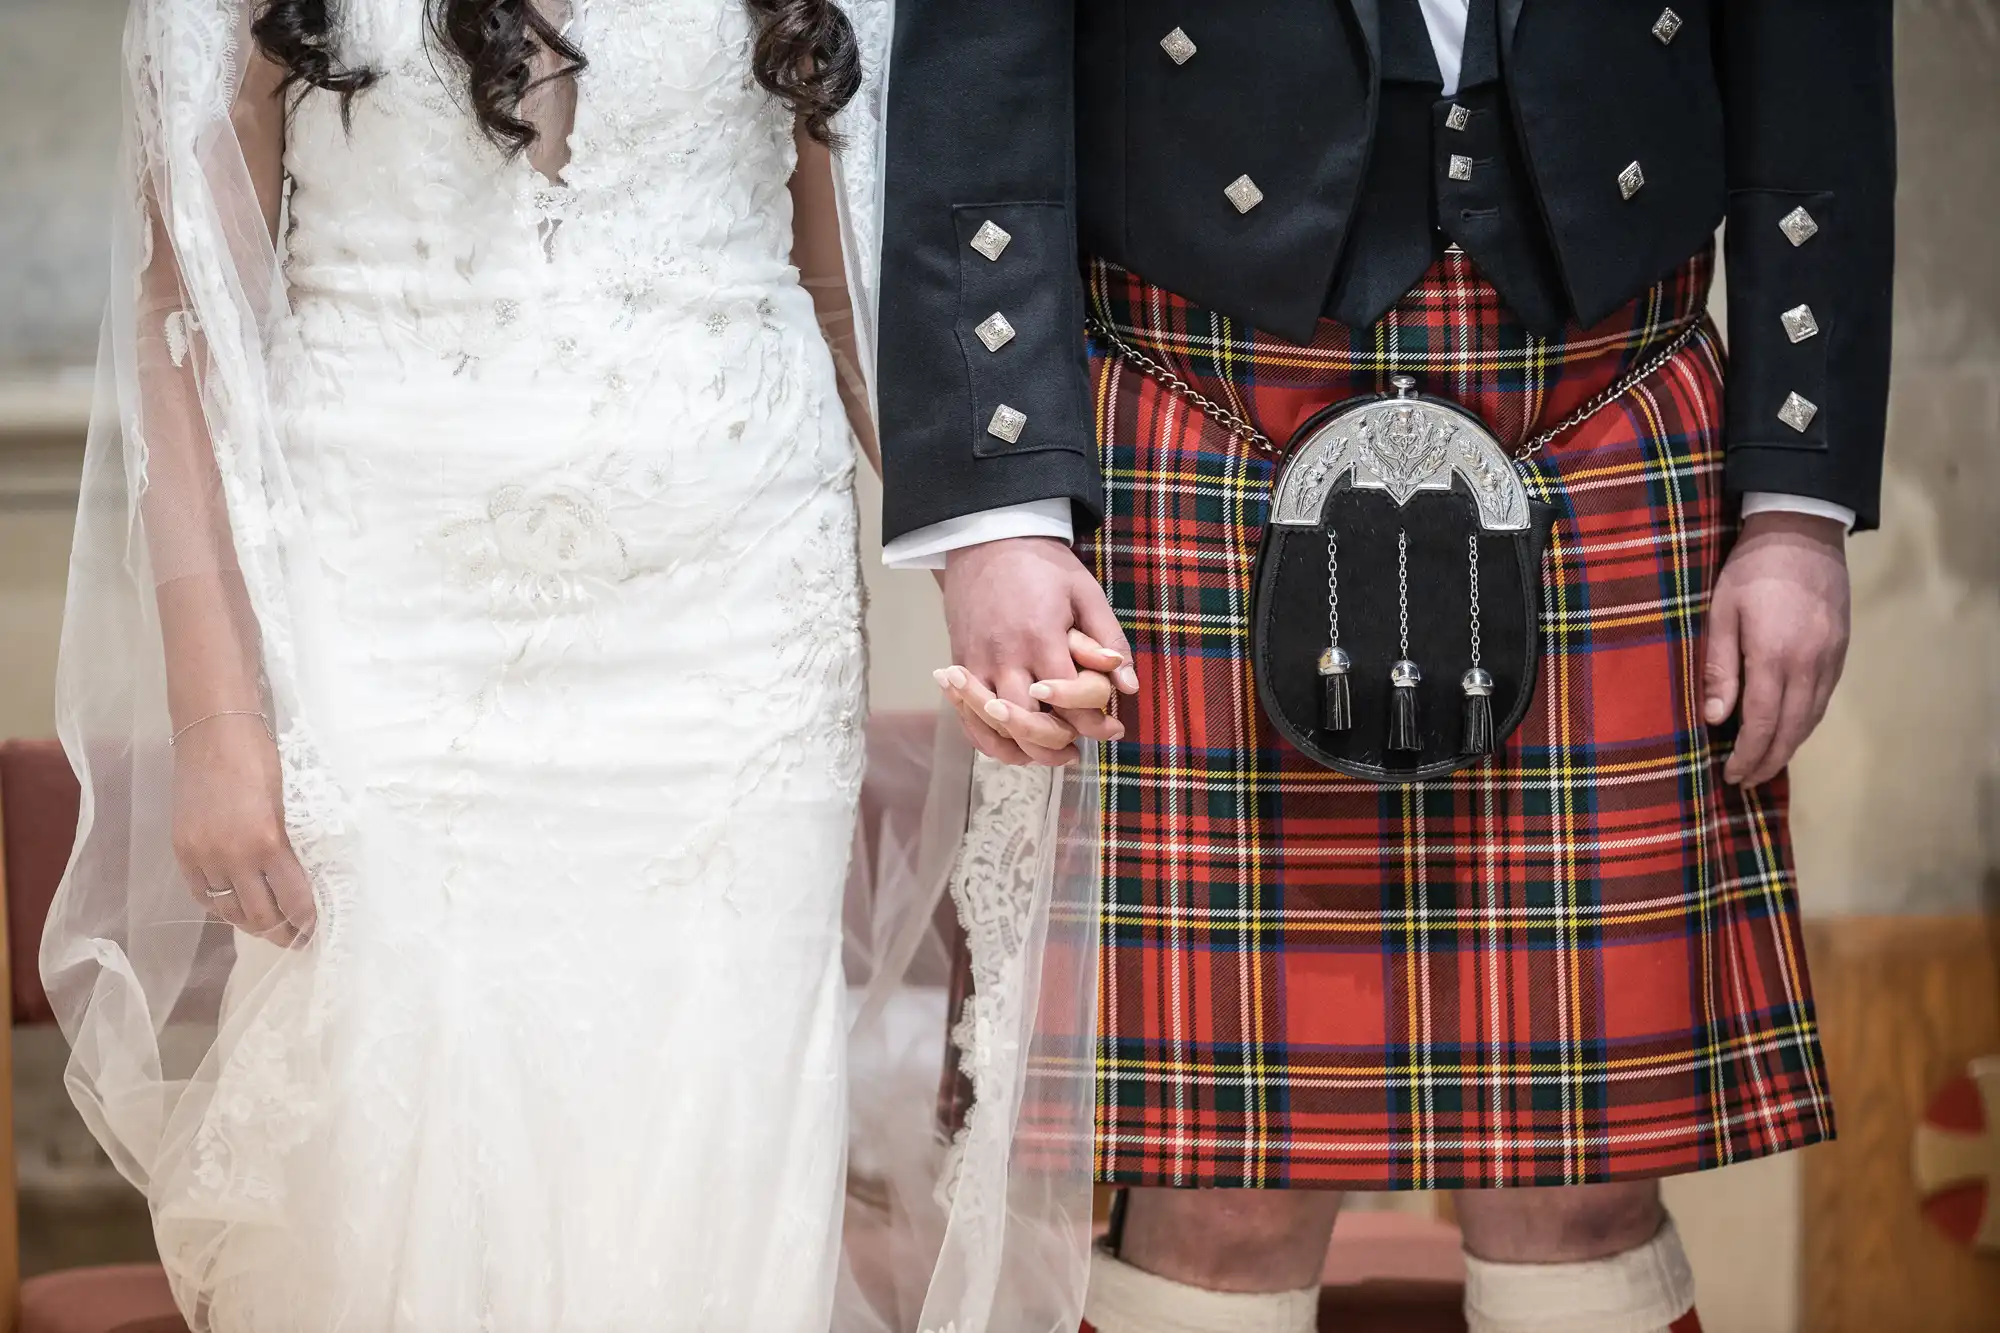 A bride in a white dress and a groom in a tartan kilt holding hands at a wedding ceremony.